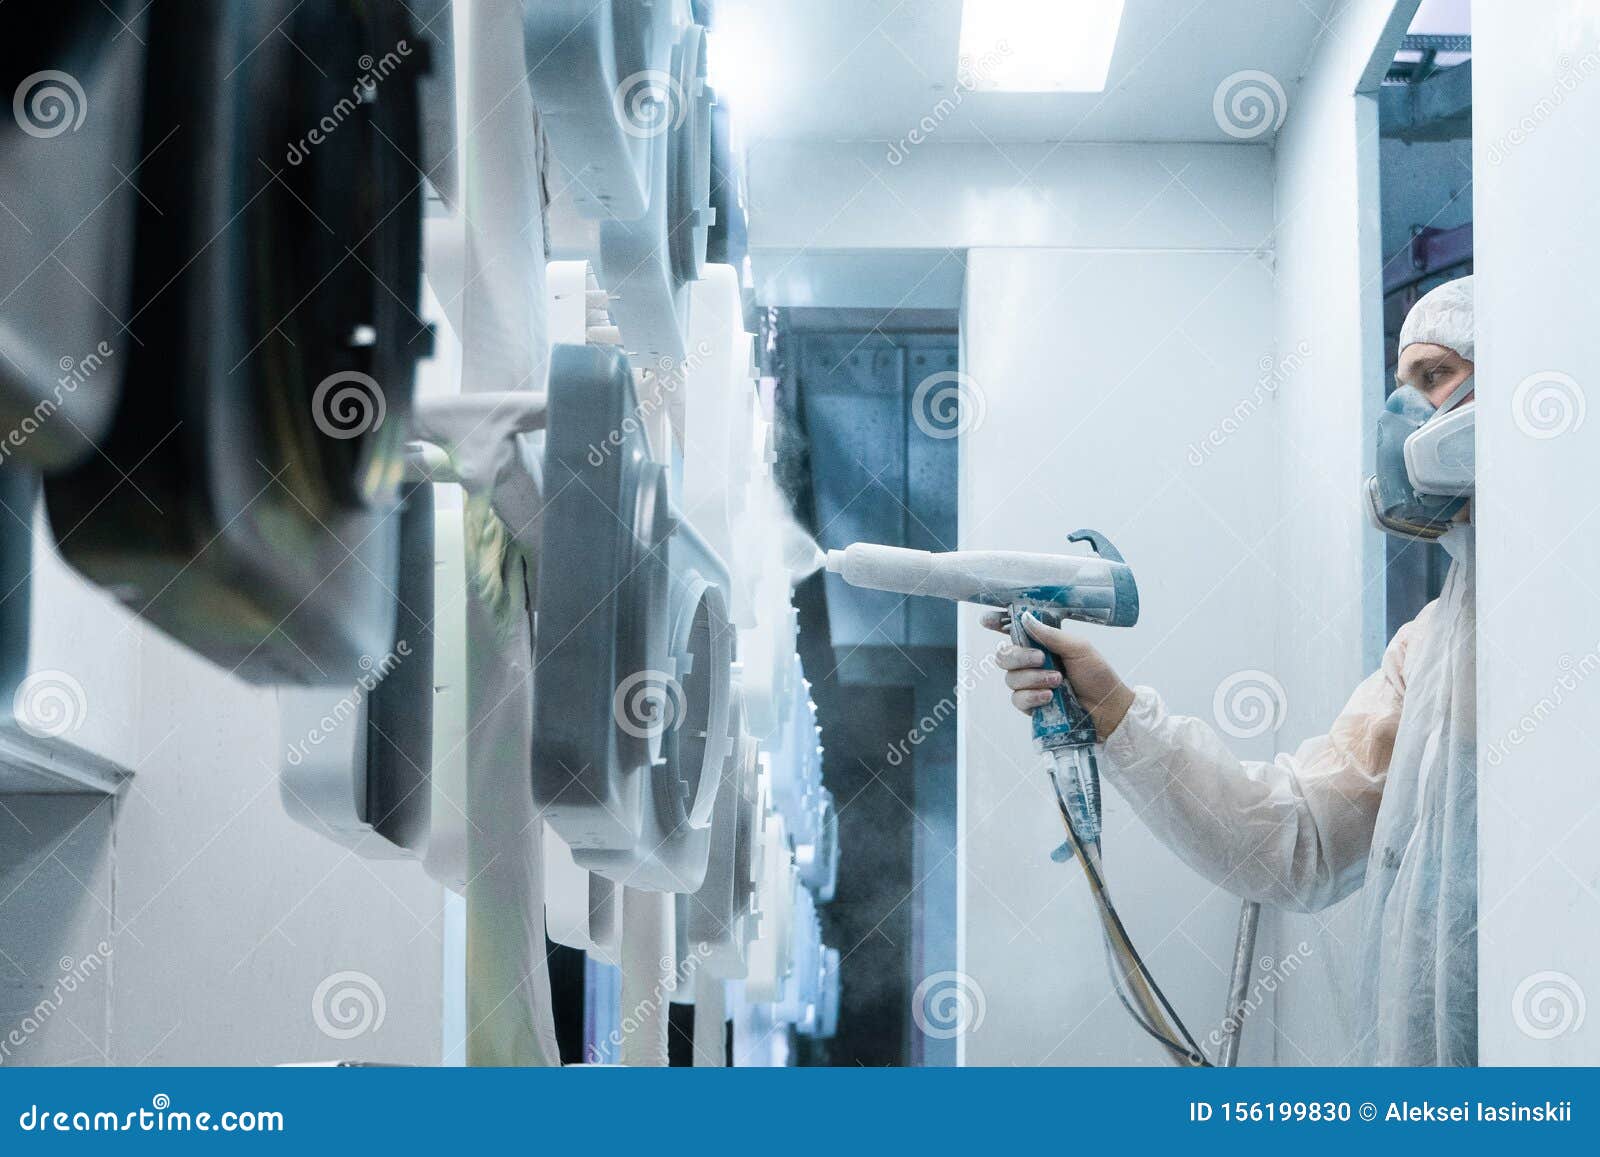 powder coating of metal parts. man in a protective suit sprays white powder paint from a gun on metal products